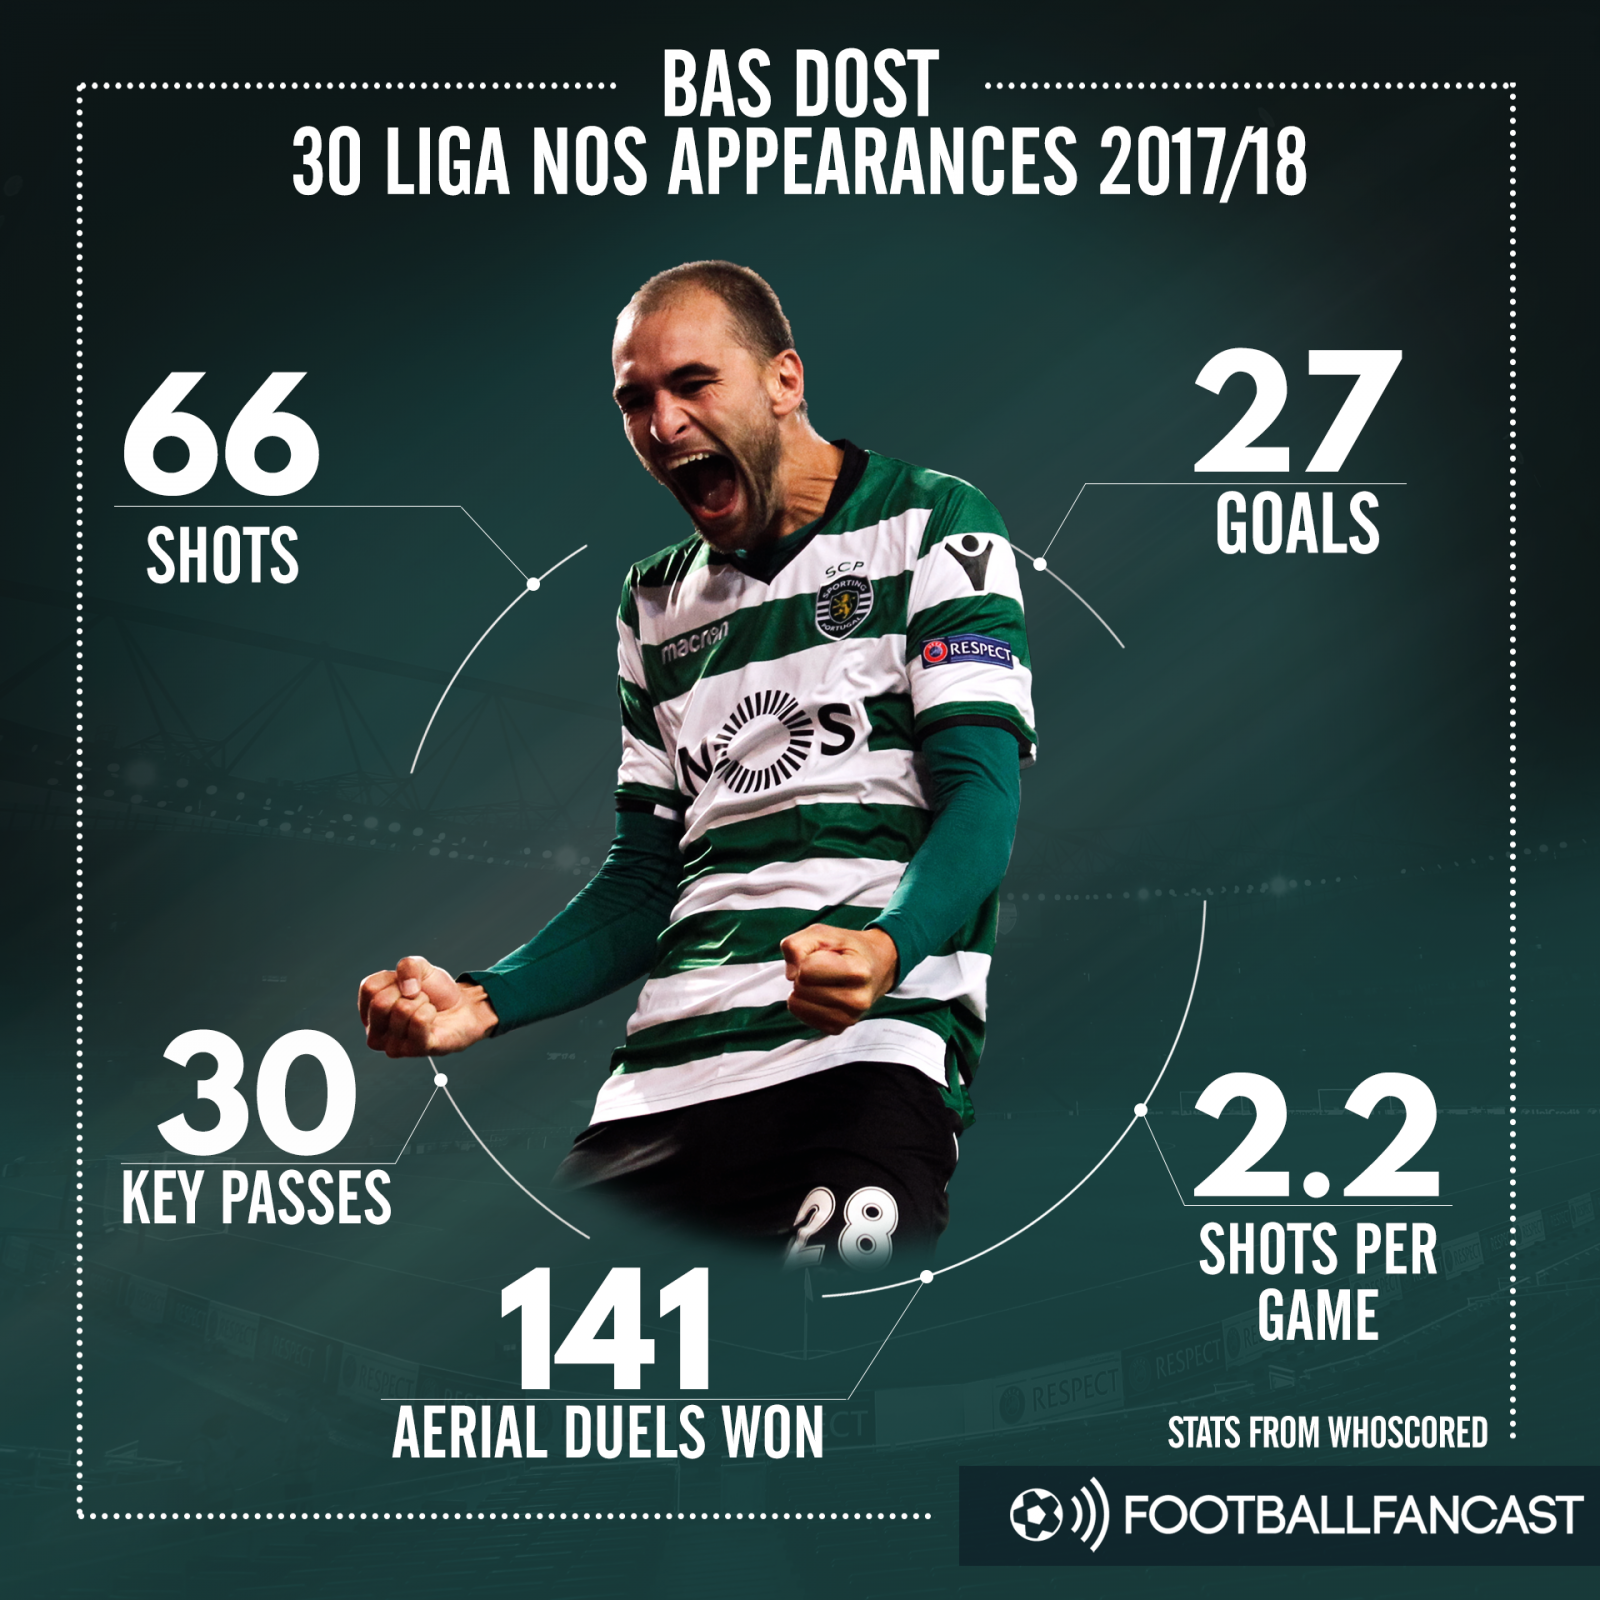 Bas Dost's stats for Sporting Lisbon this season